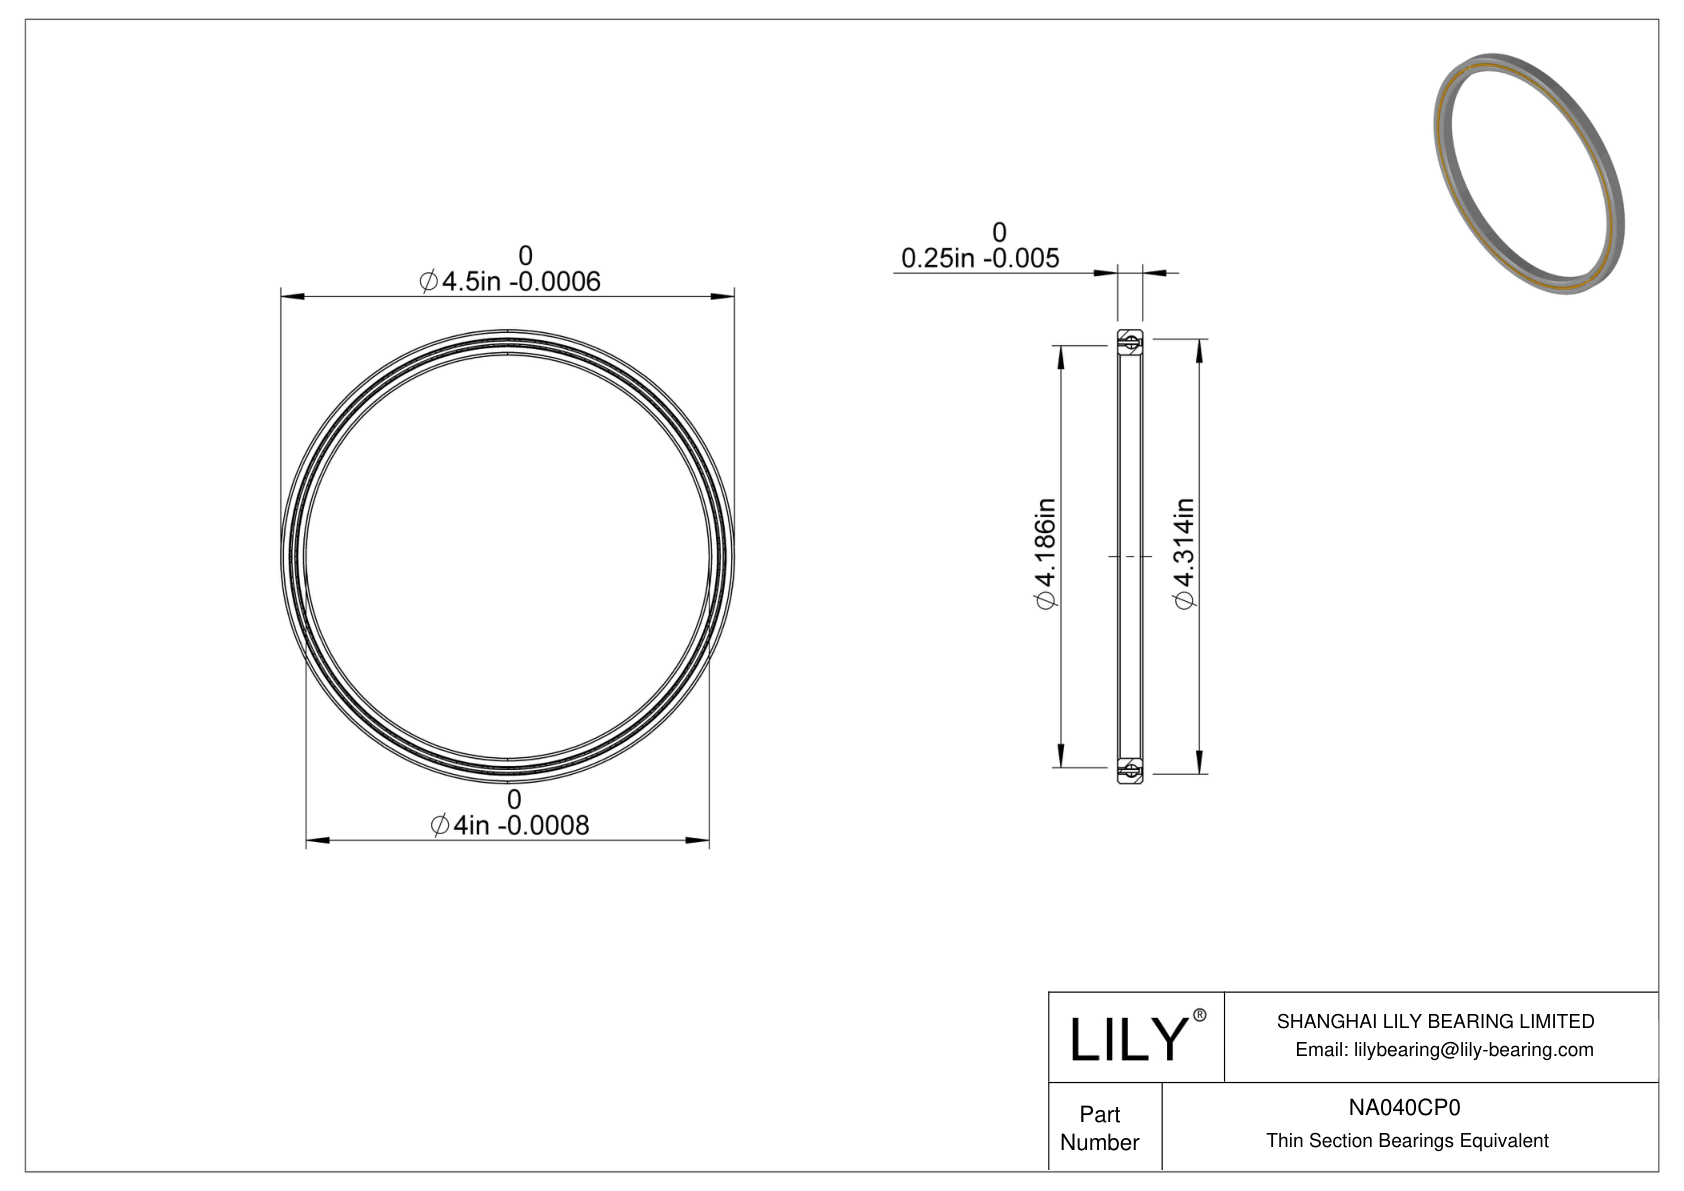 NA040CP0 Constant Section (CS) Bearings cad drawing